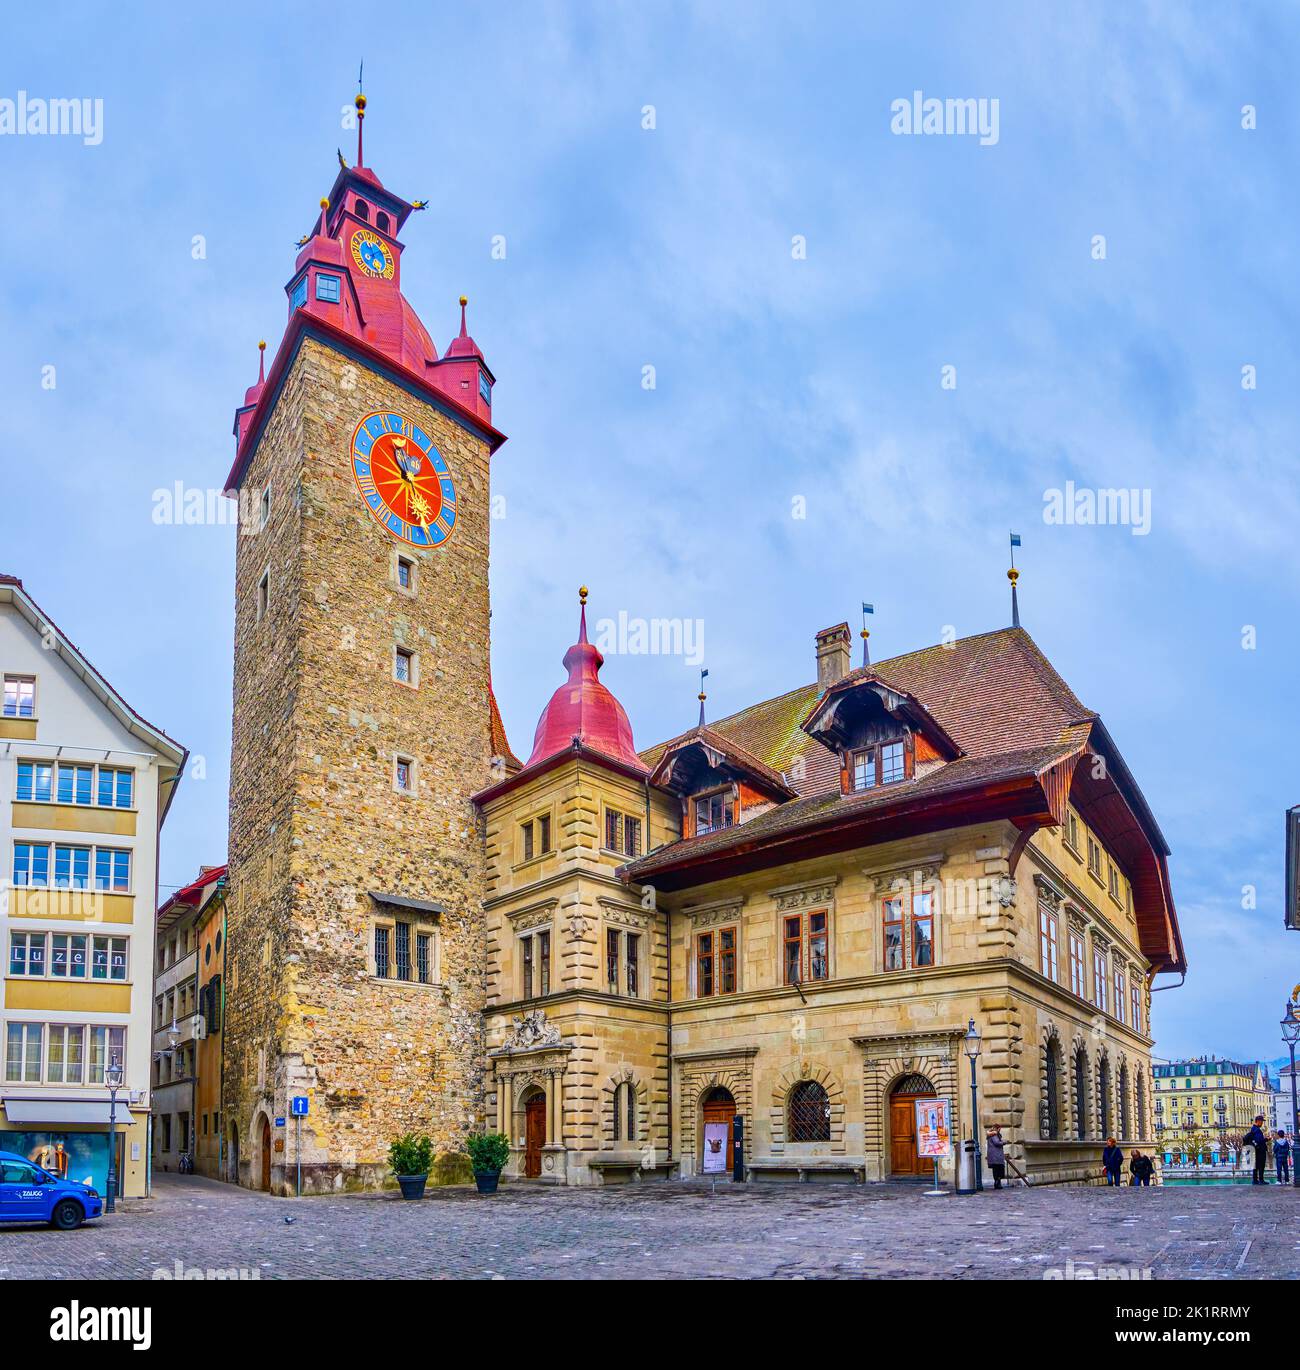 LUCERNE, SWITZERLAND - MARCH 30, 2022: Kornmarkt square with its amin landmark, the medieval Town Hall (Rathaus) with its tall clock tower, on March 3 Stock Photo